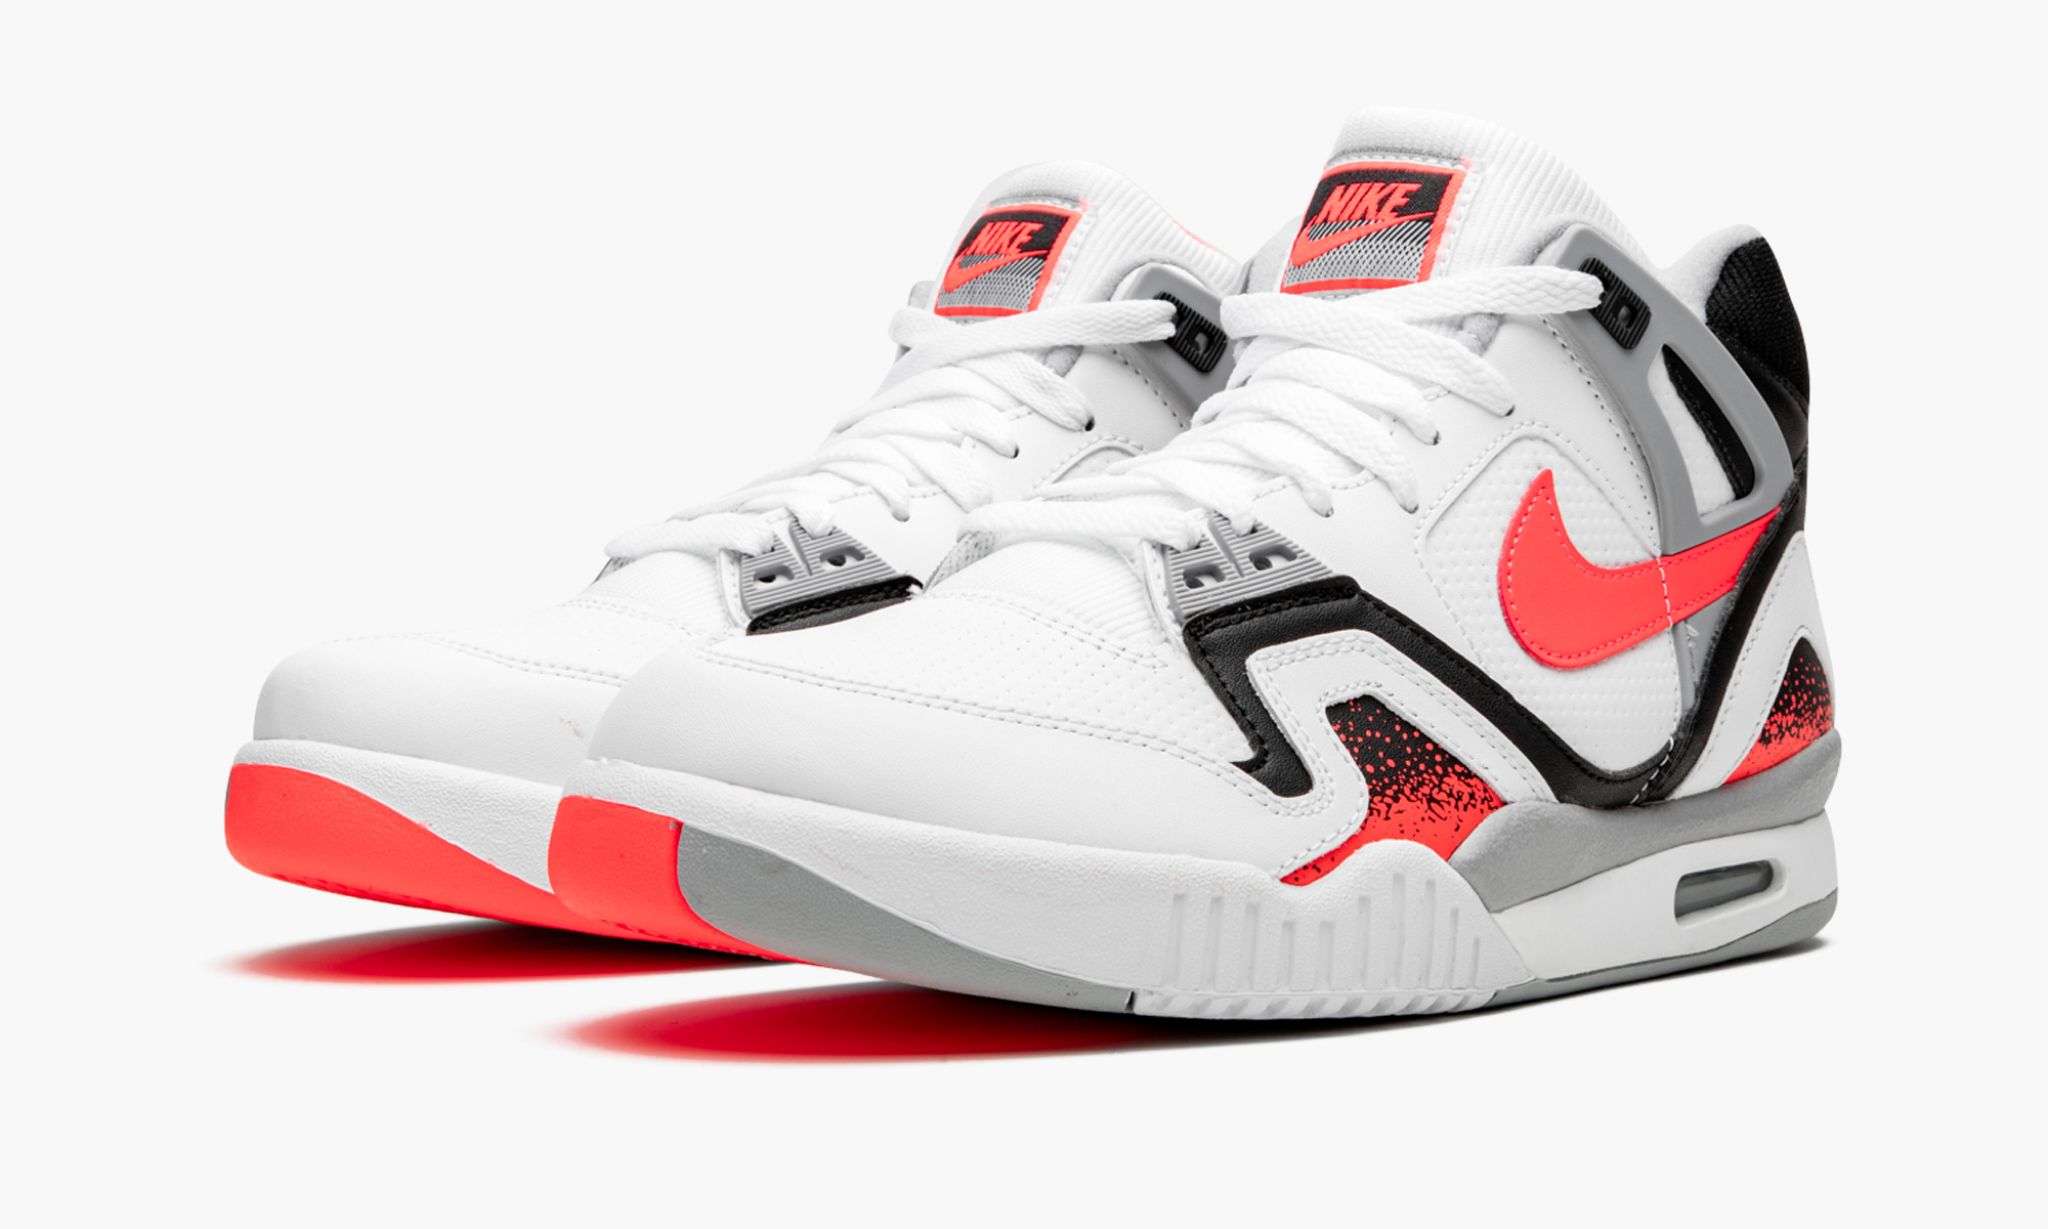 Goods on Twitter: "The former signature shoe of Andre Agassi, the Nike Air Tech Challenge II Lava” considered among the greatest tennis shoes in history. It has inspired